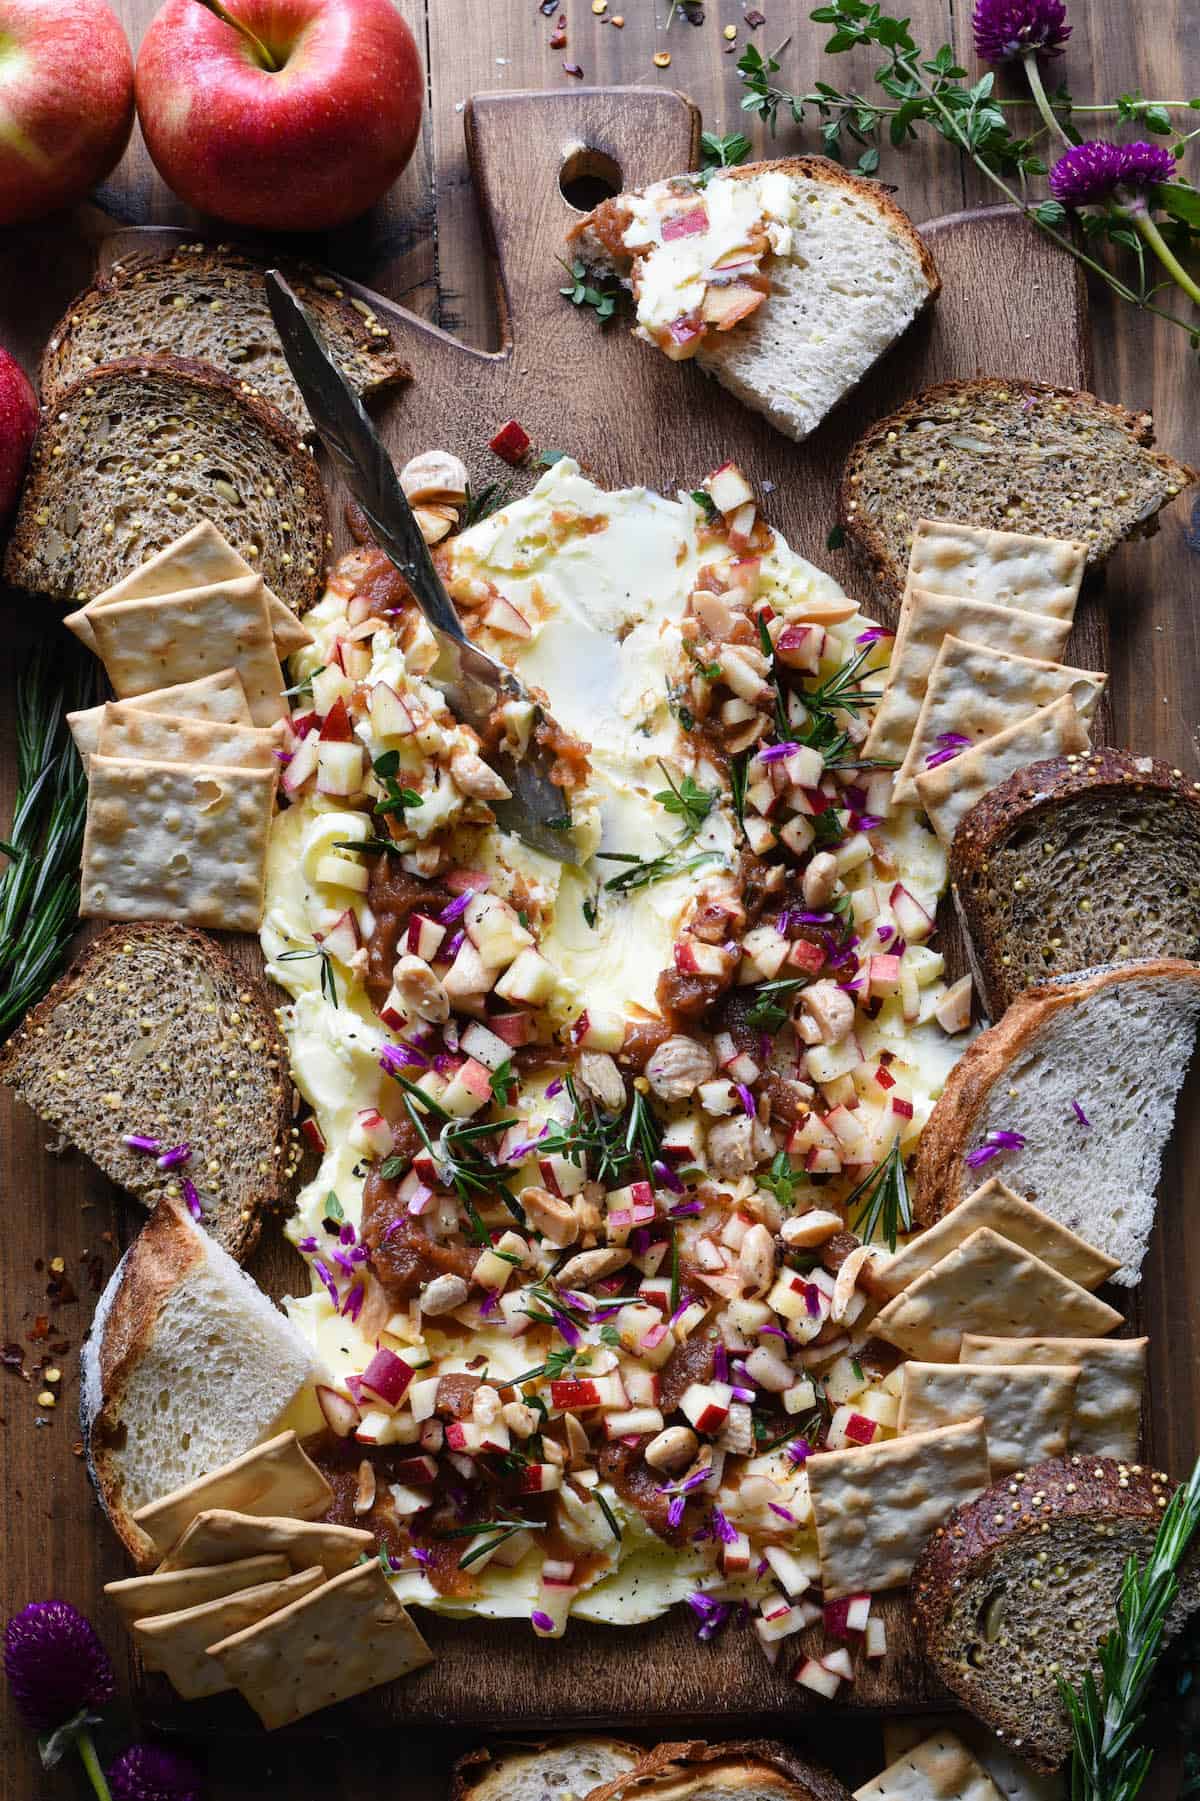 An Autumn Butter Board topped with delicious fall ingredients like apple butter, herbs and nuts.